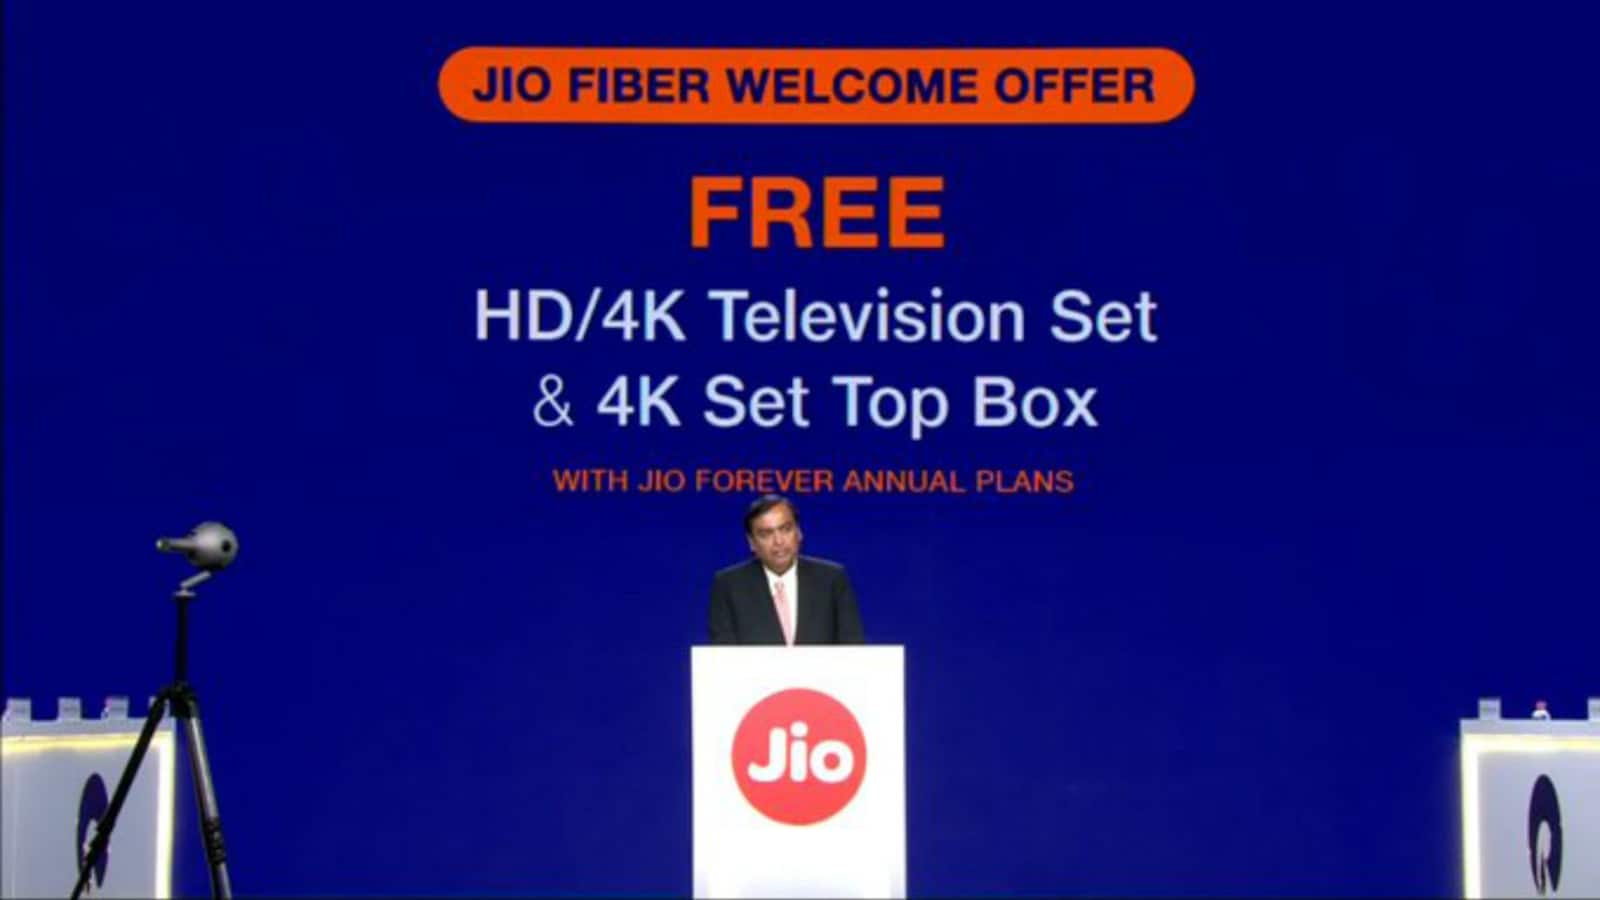 plans: how you get free HD TV, 4K box